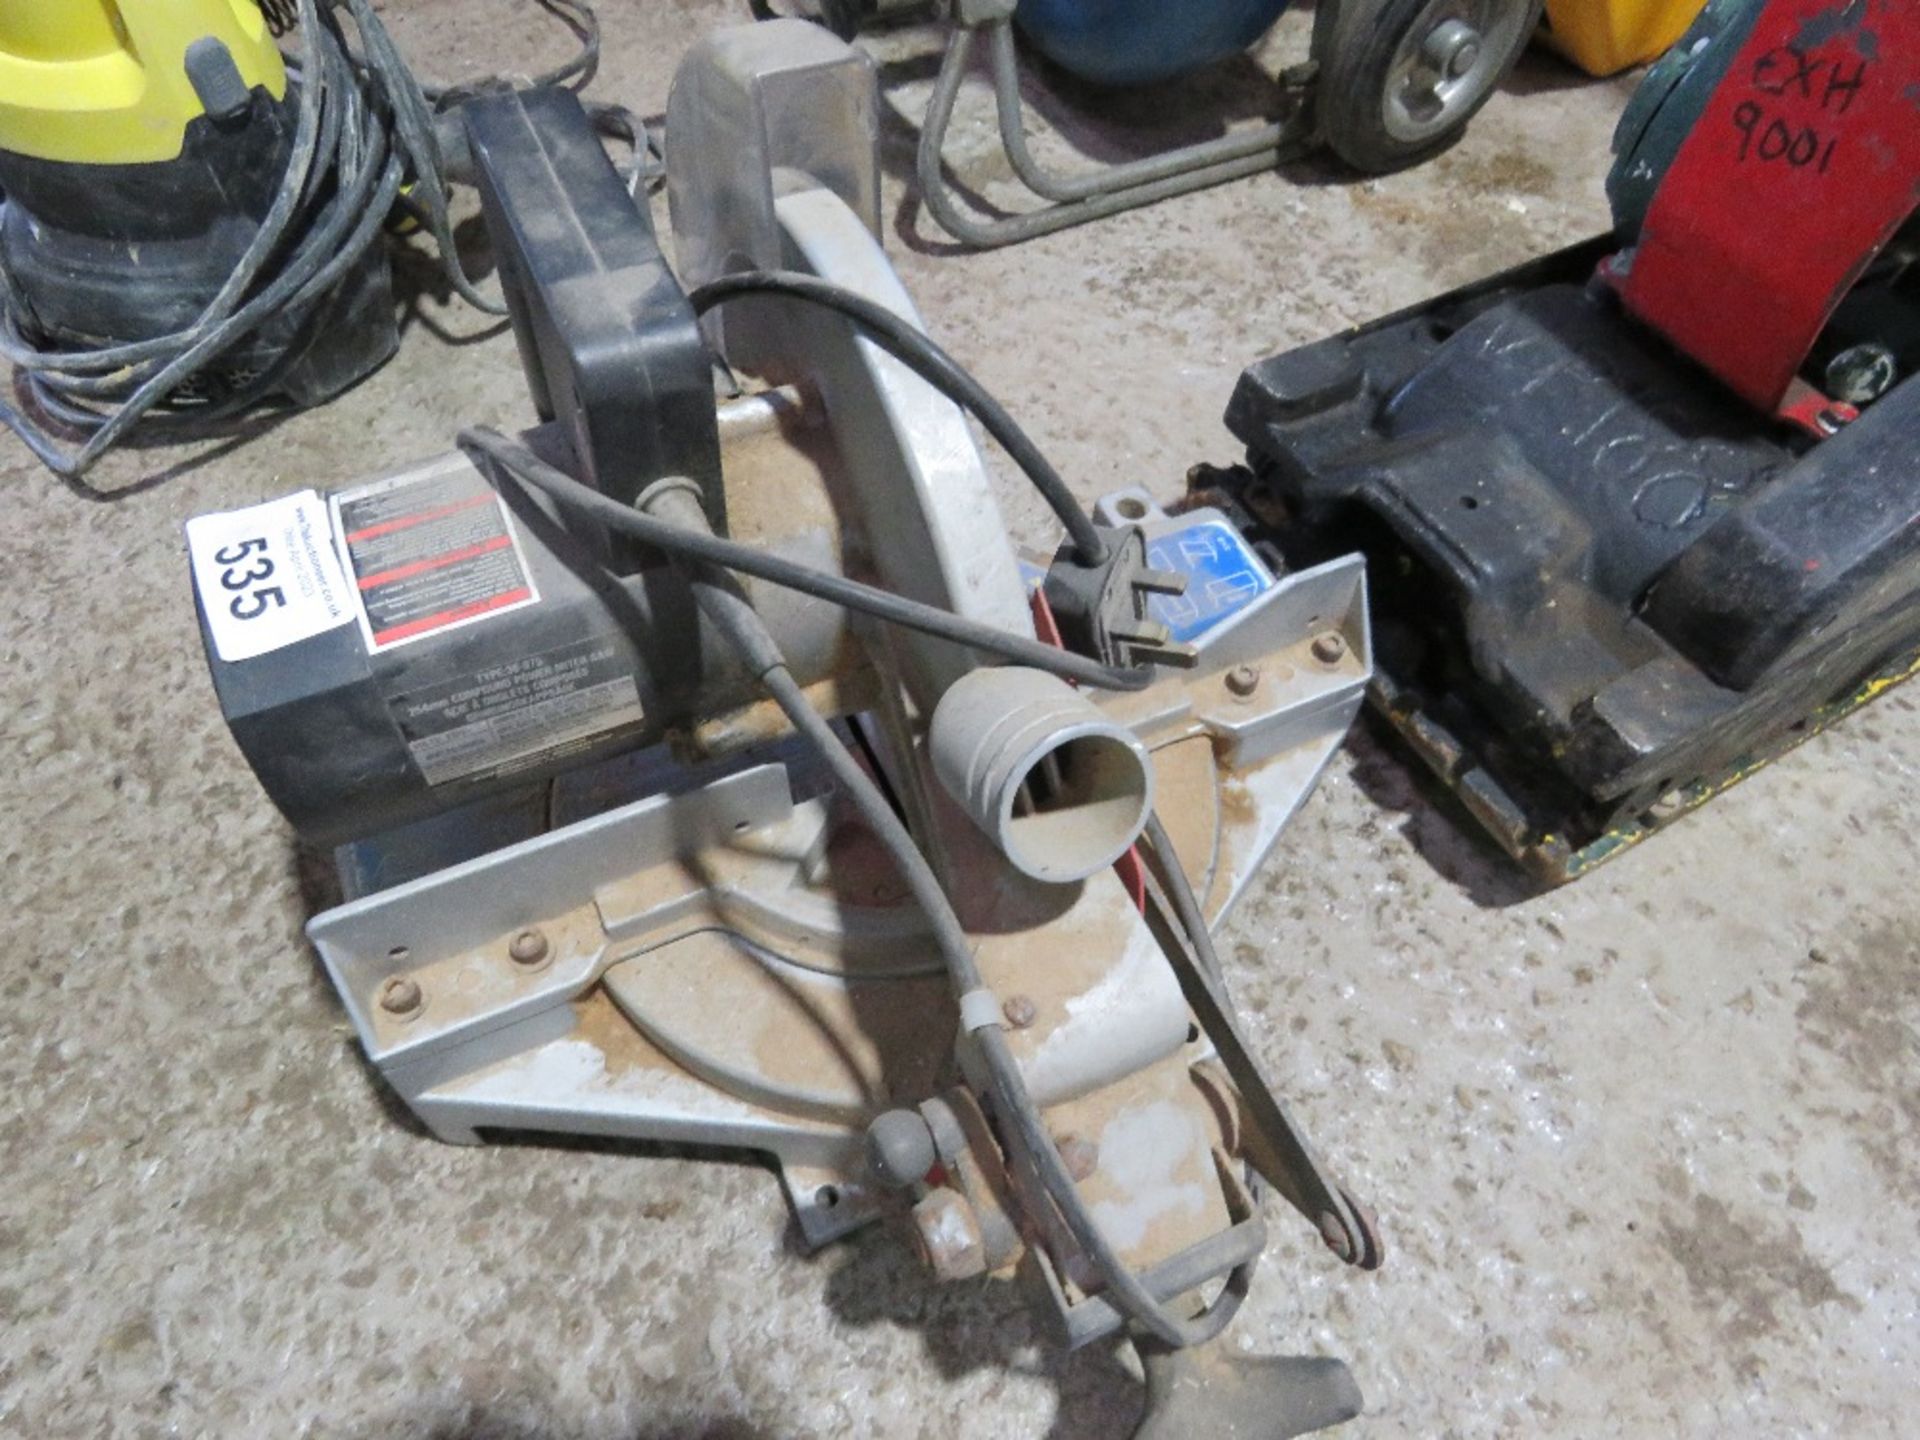 DELTA COMPOUND MITRE SAW, 240VOLT. SOURCED FROM COMPANY LIQUIDATION. THIS LOT IS SOLD UNDER THE AU